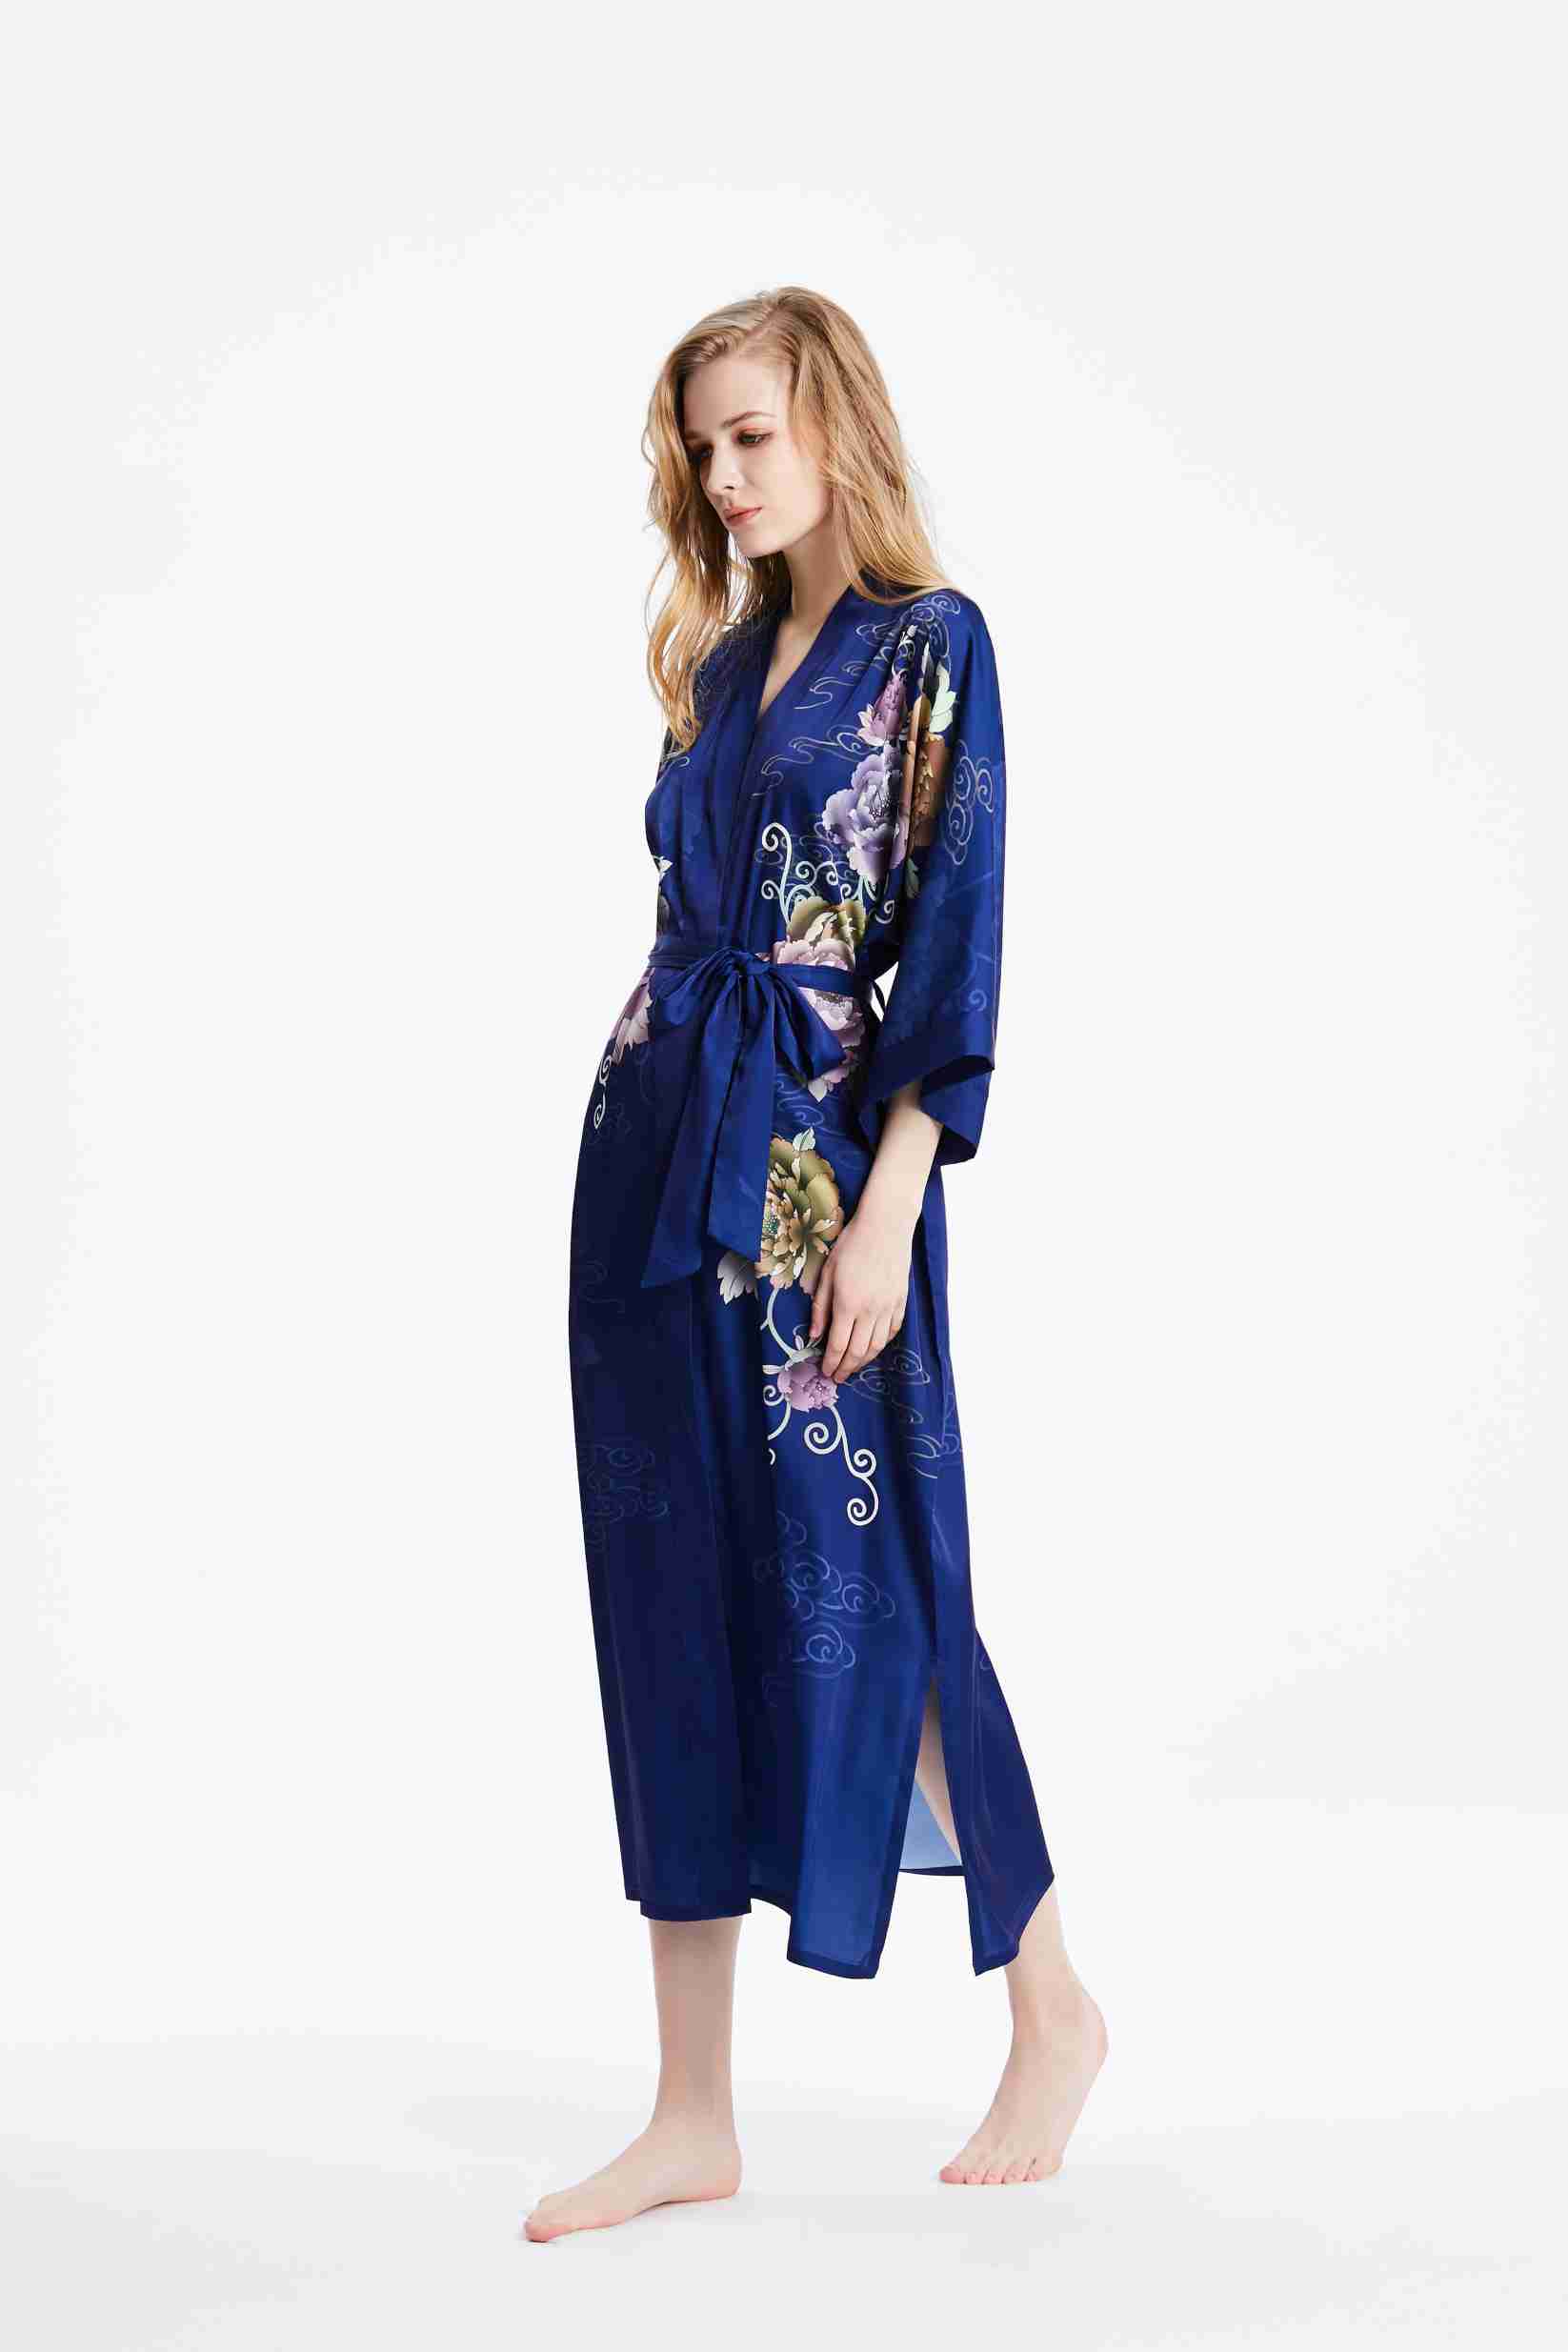 Best Ladies Full night Authentic Silk Blue Kimono Robe gown with Custom Floral Print Factory Wholesale